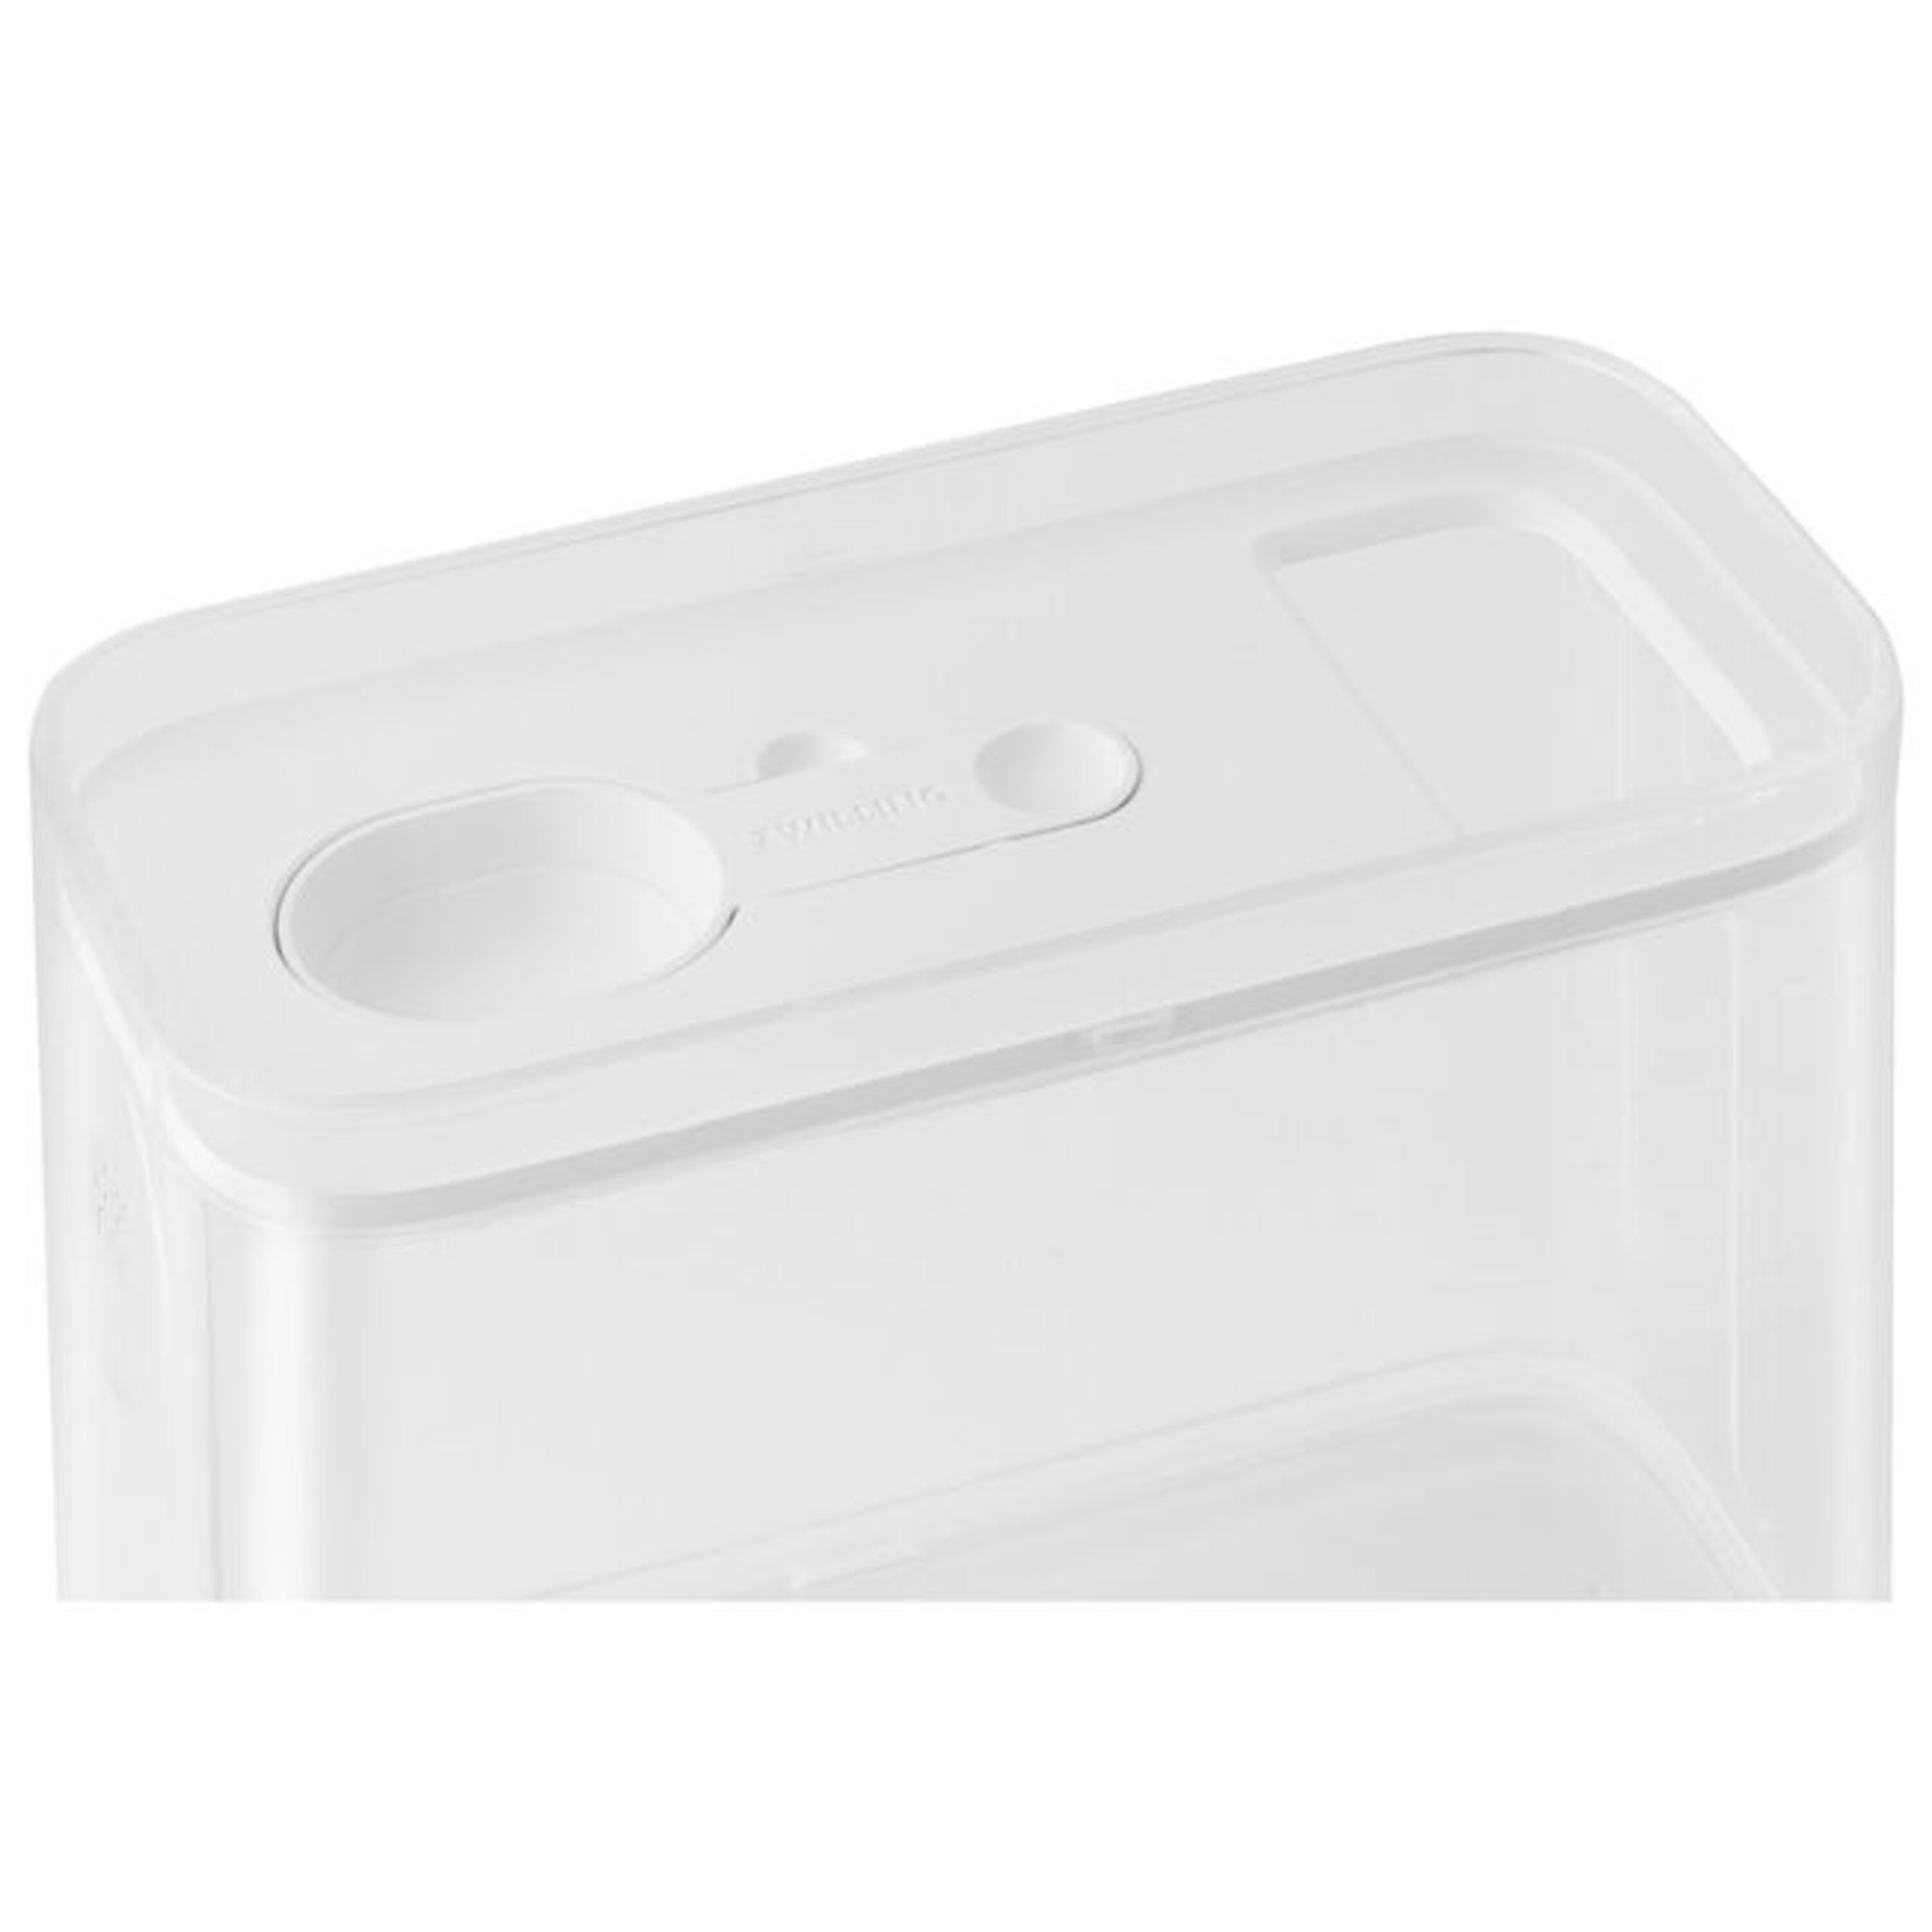 Ejwqwqe Cheese Storage Container - Ham and Cheese Container,Sealed Square Sandwich Meat Containers for Butter Keep with Cheese Holder Box, Size: Free